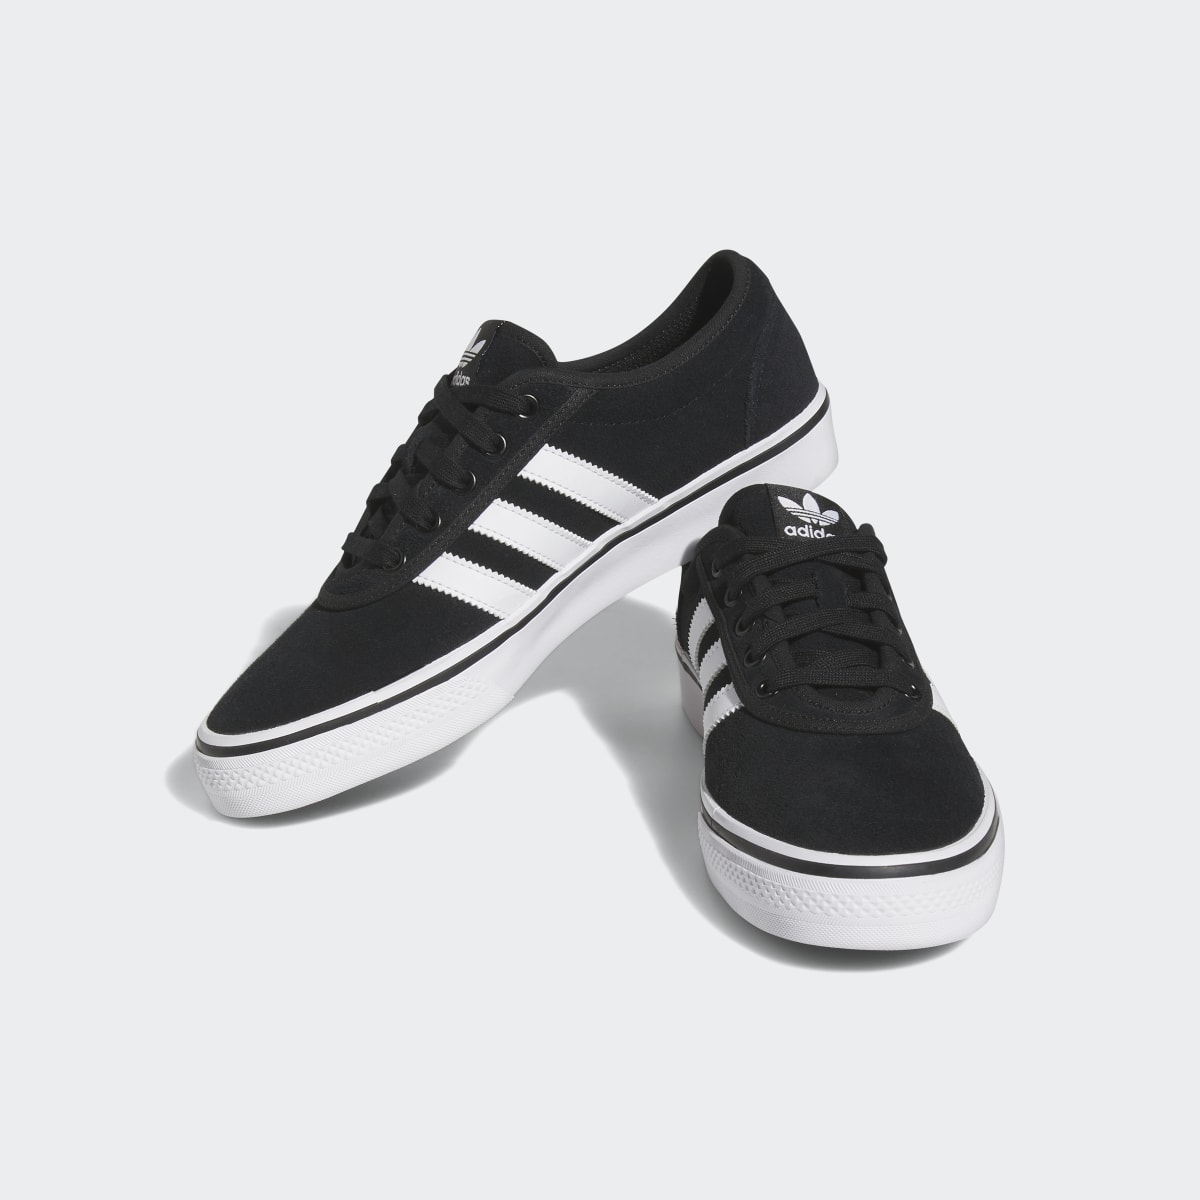 Adidas Adiease Shoes. 5